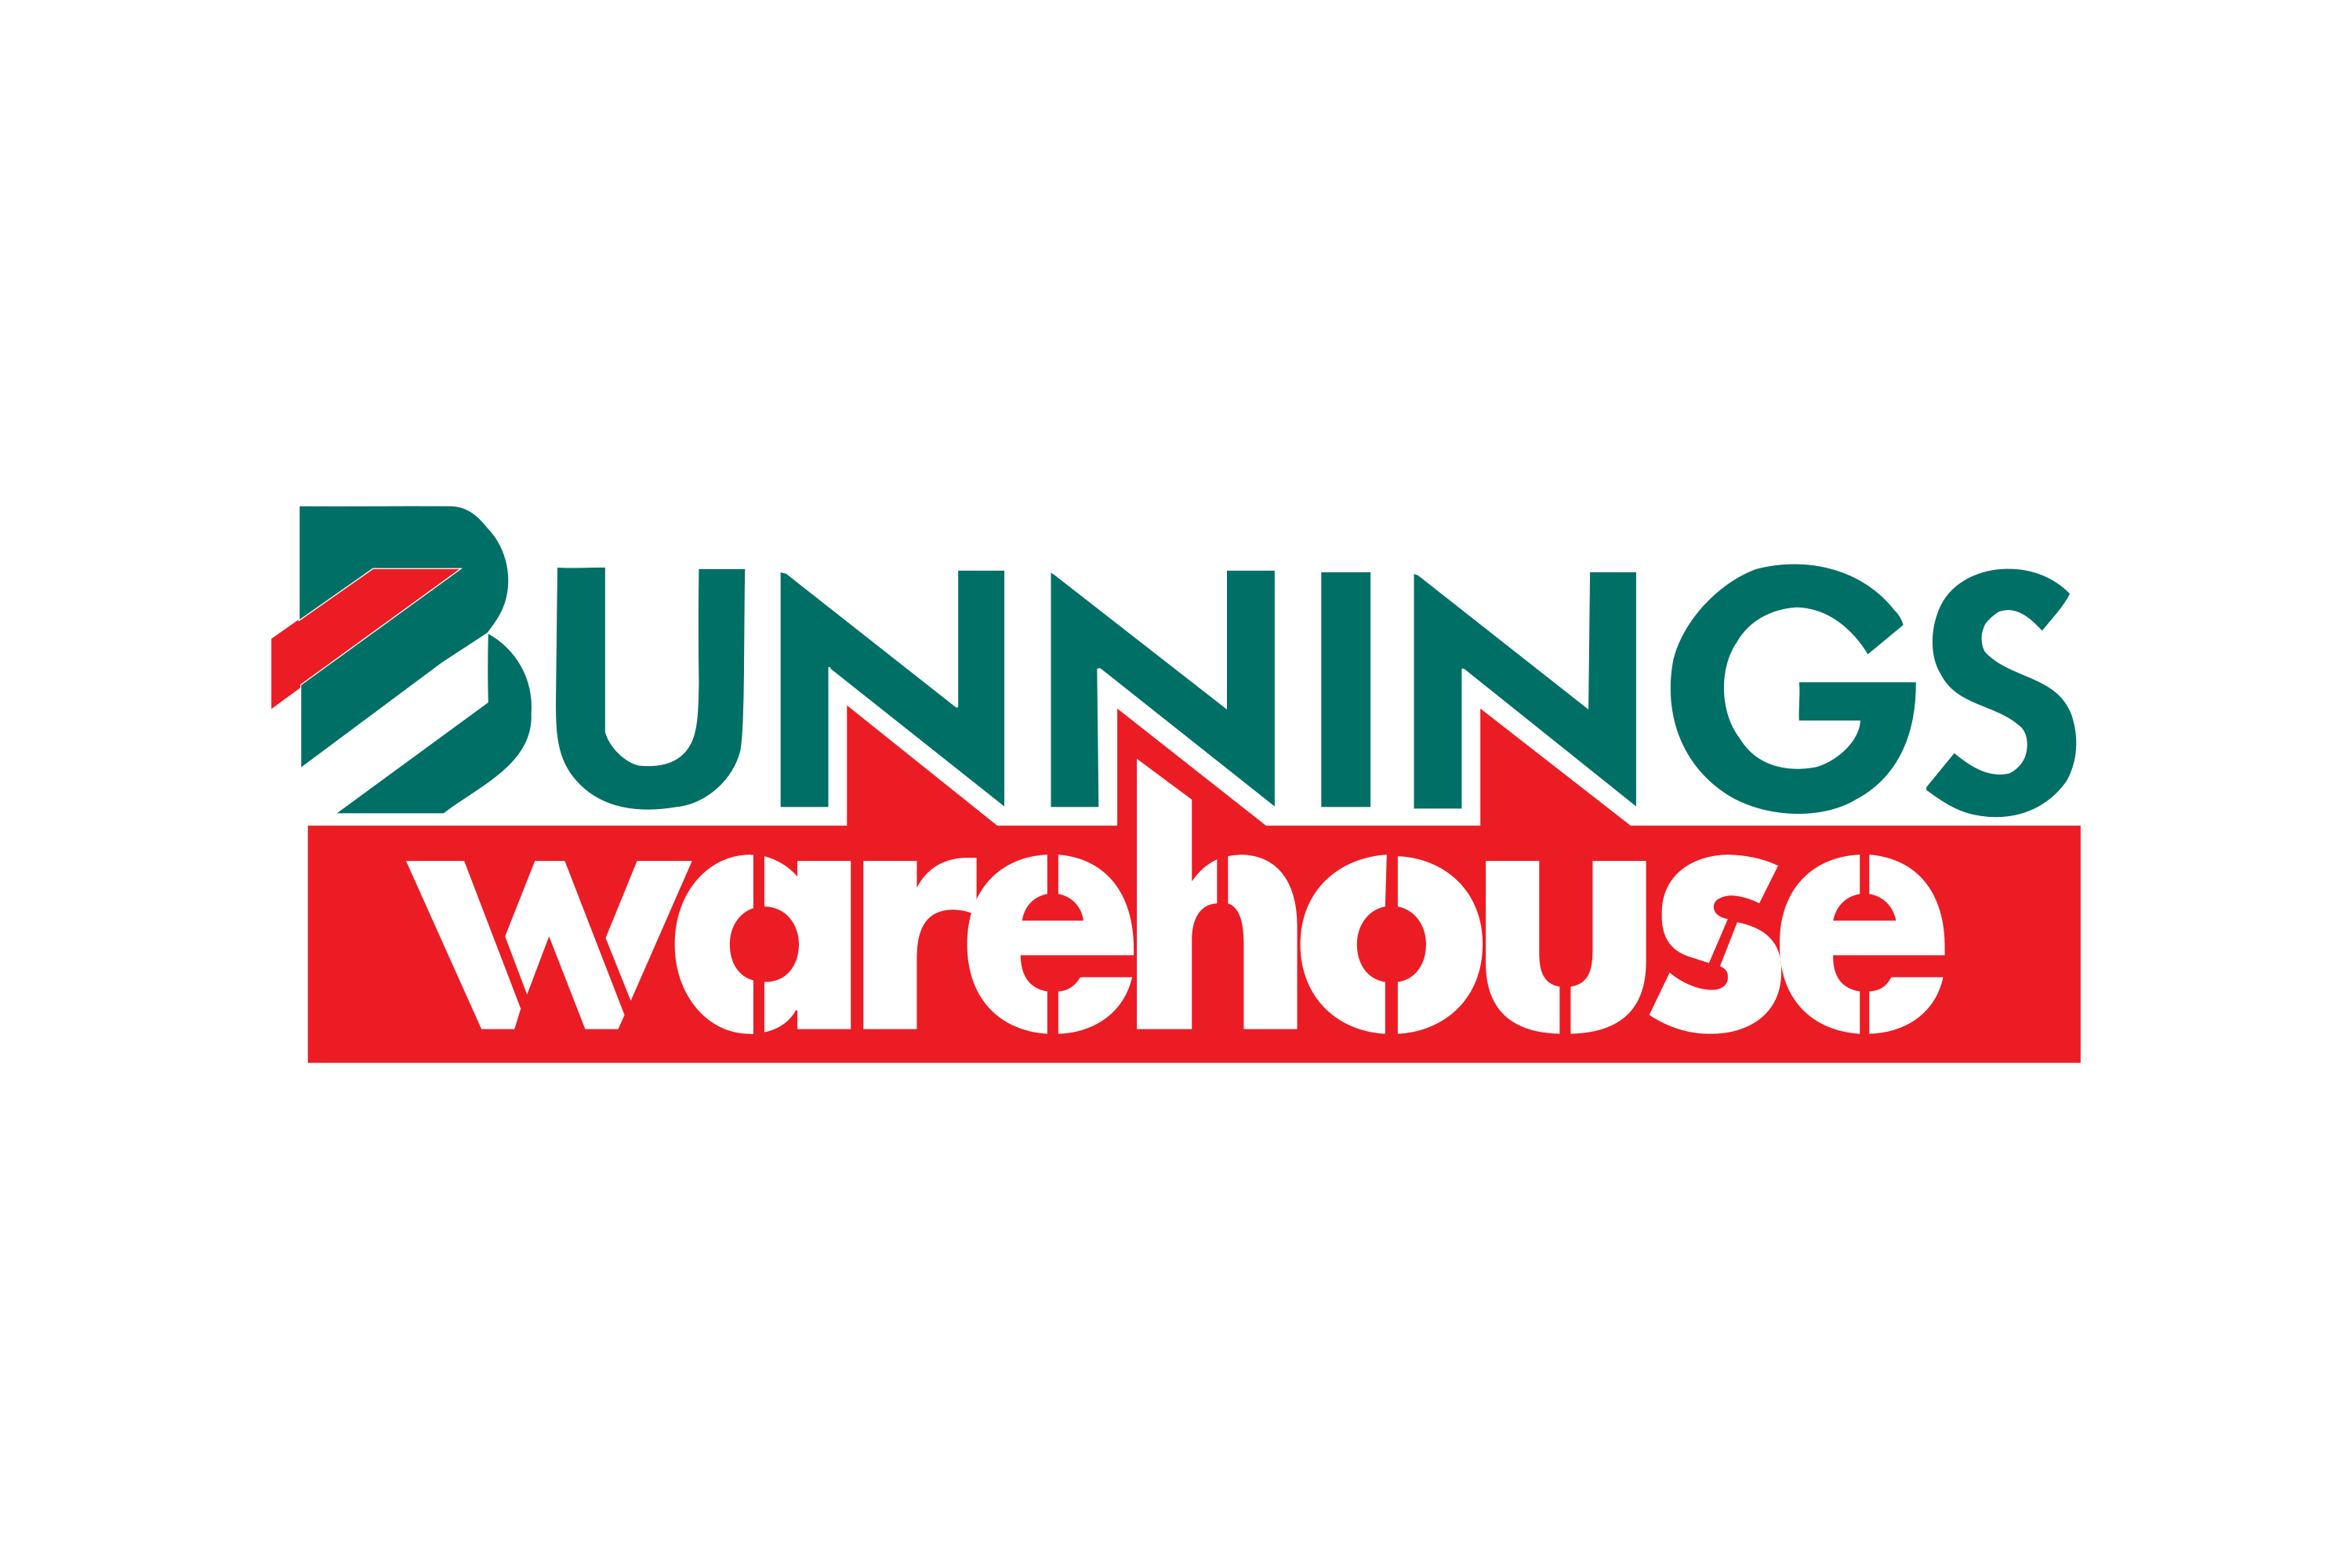 Download Bunnings Group (Bunnings Warehouse) Logo in SVG Vector or PNG File  Format 